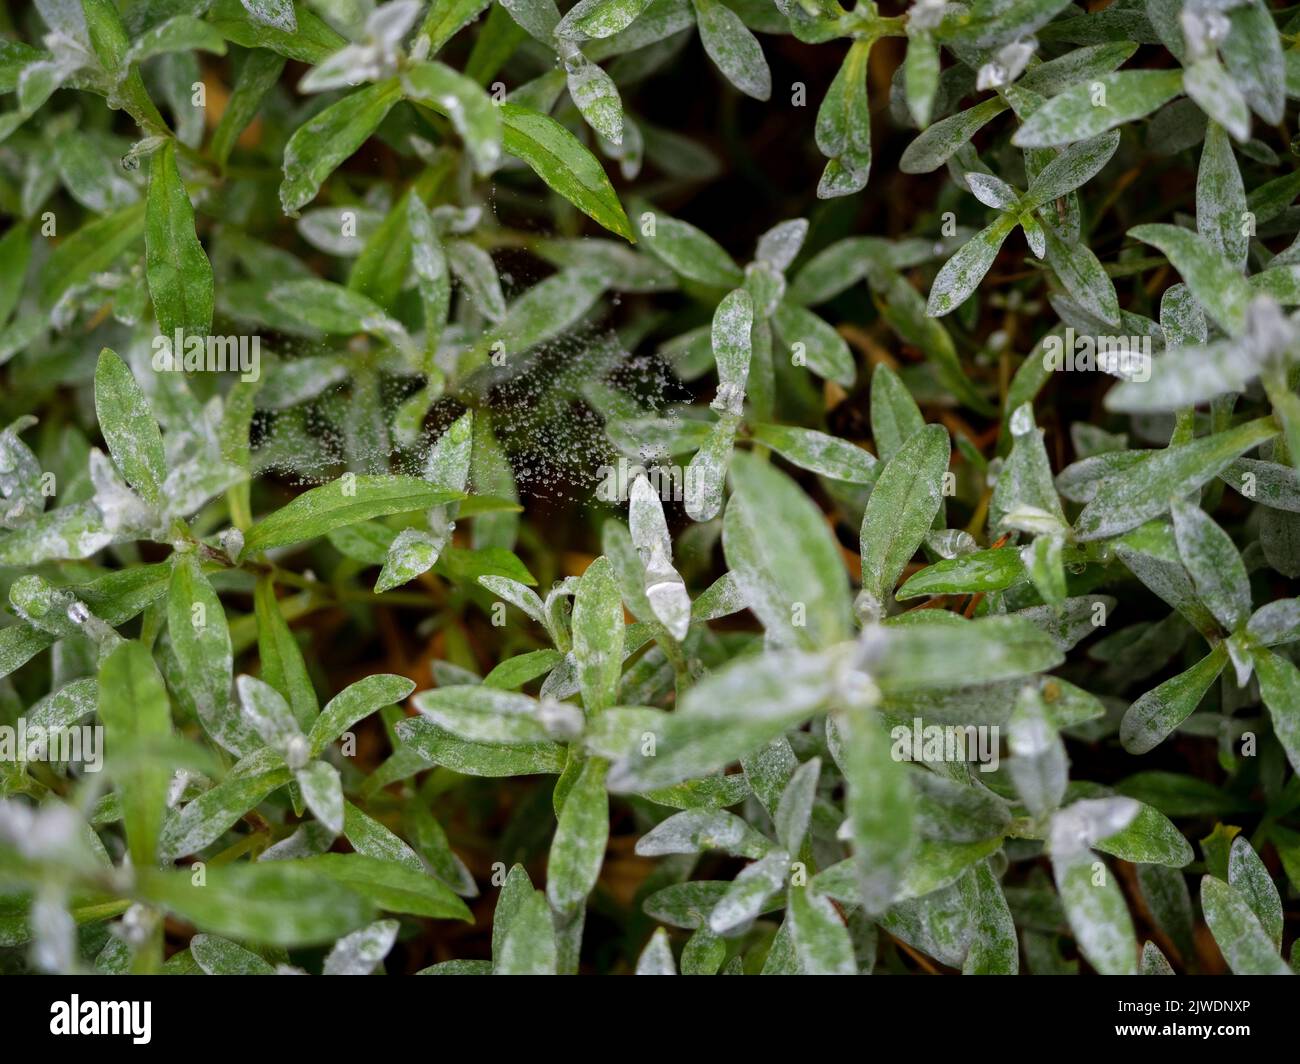 Snow in Summer plant leaves, close up photo of a shrub in outdoor garden Stock Photo